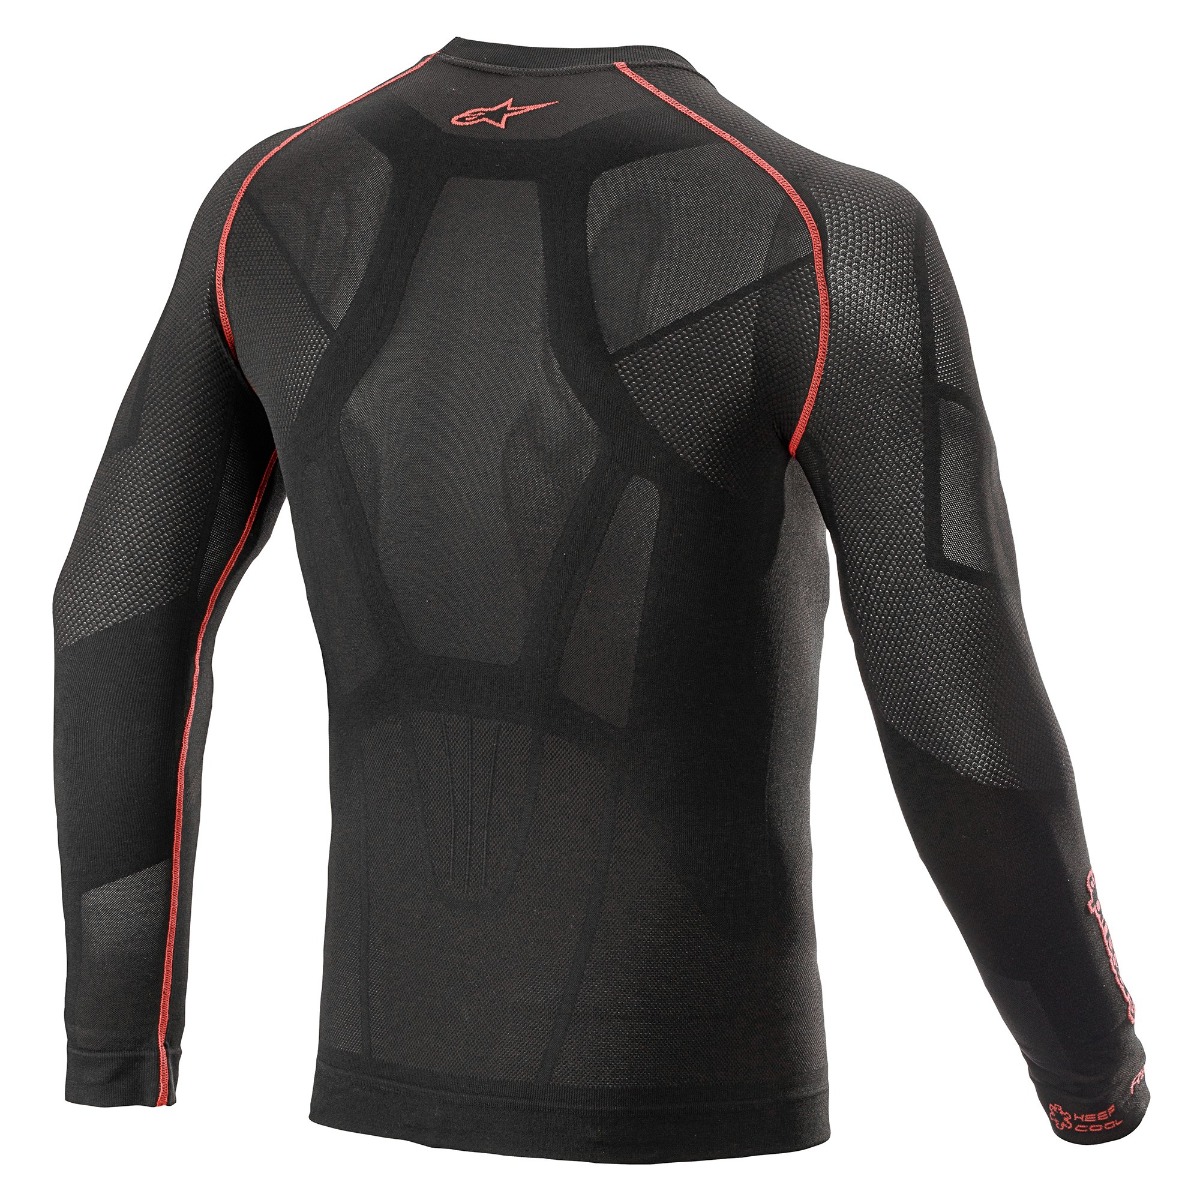 Image of EU Alpinestars Ride Tech V2 Top Long Sleeve Black Red Summer Taille XS-S